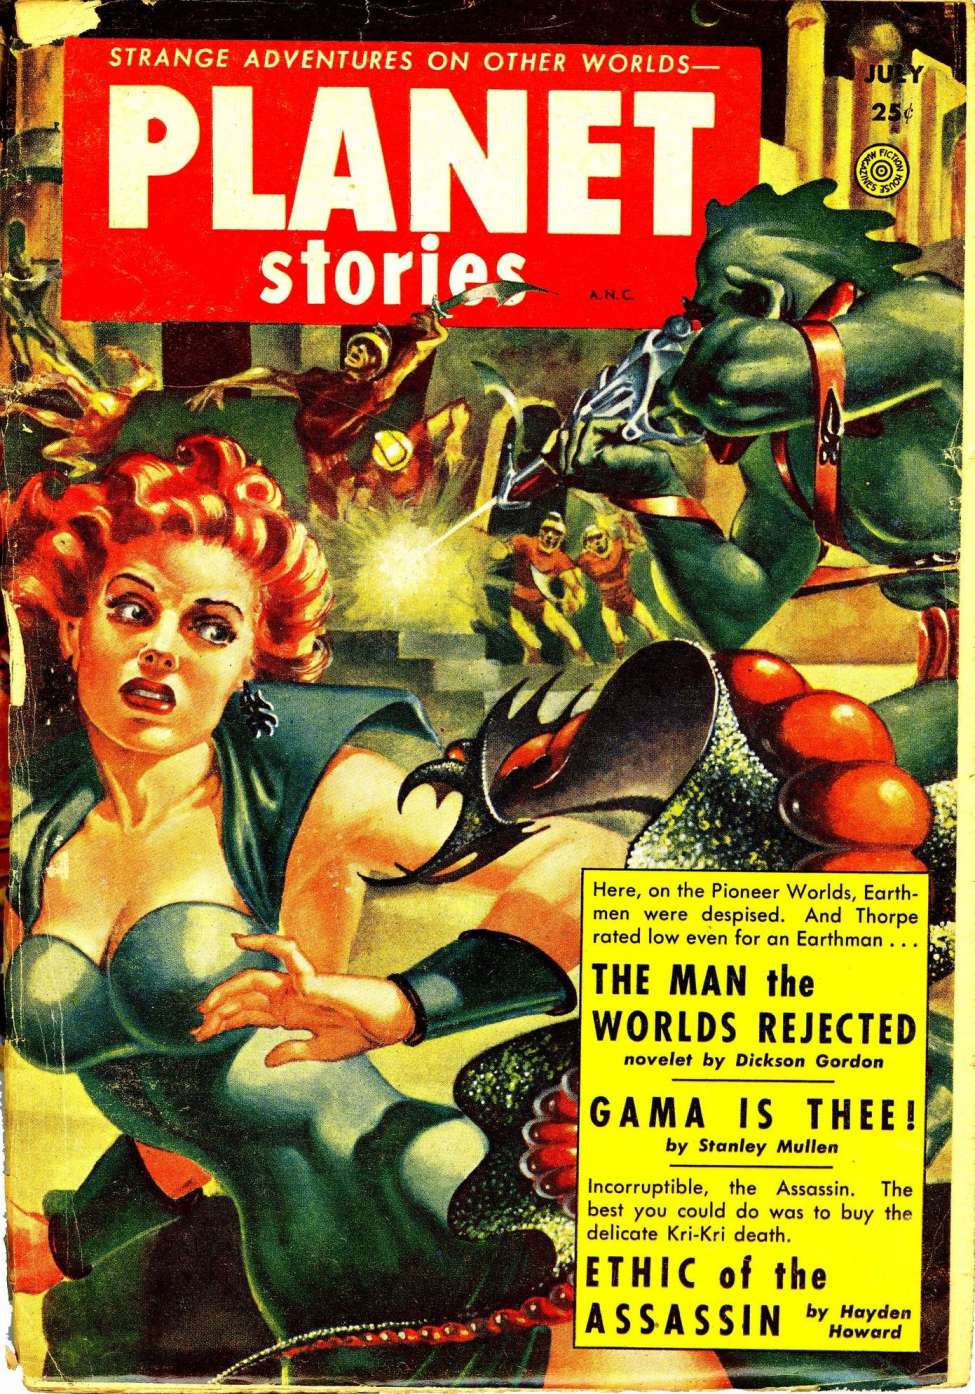 Book Cover For Planet Stories v6 1 - The Man the Worlds Rejected - Dickson Gordon